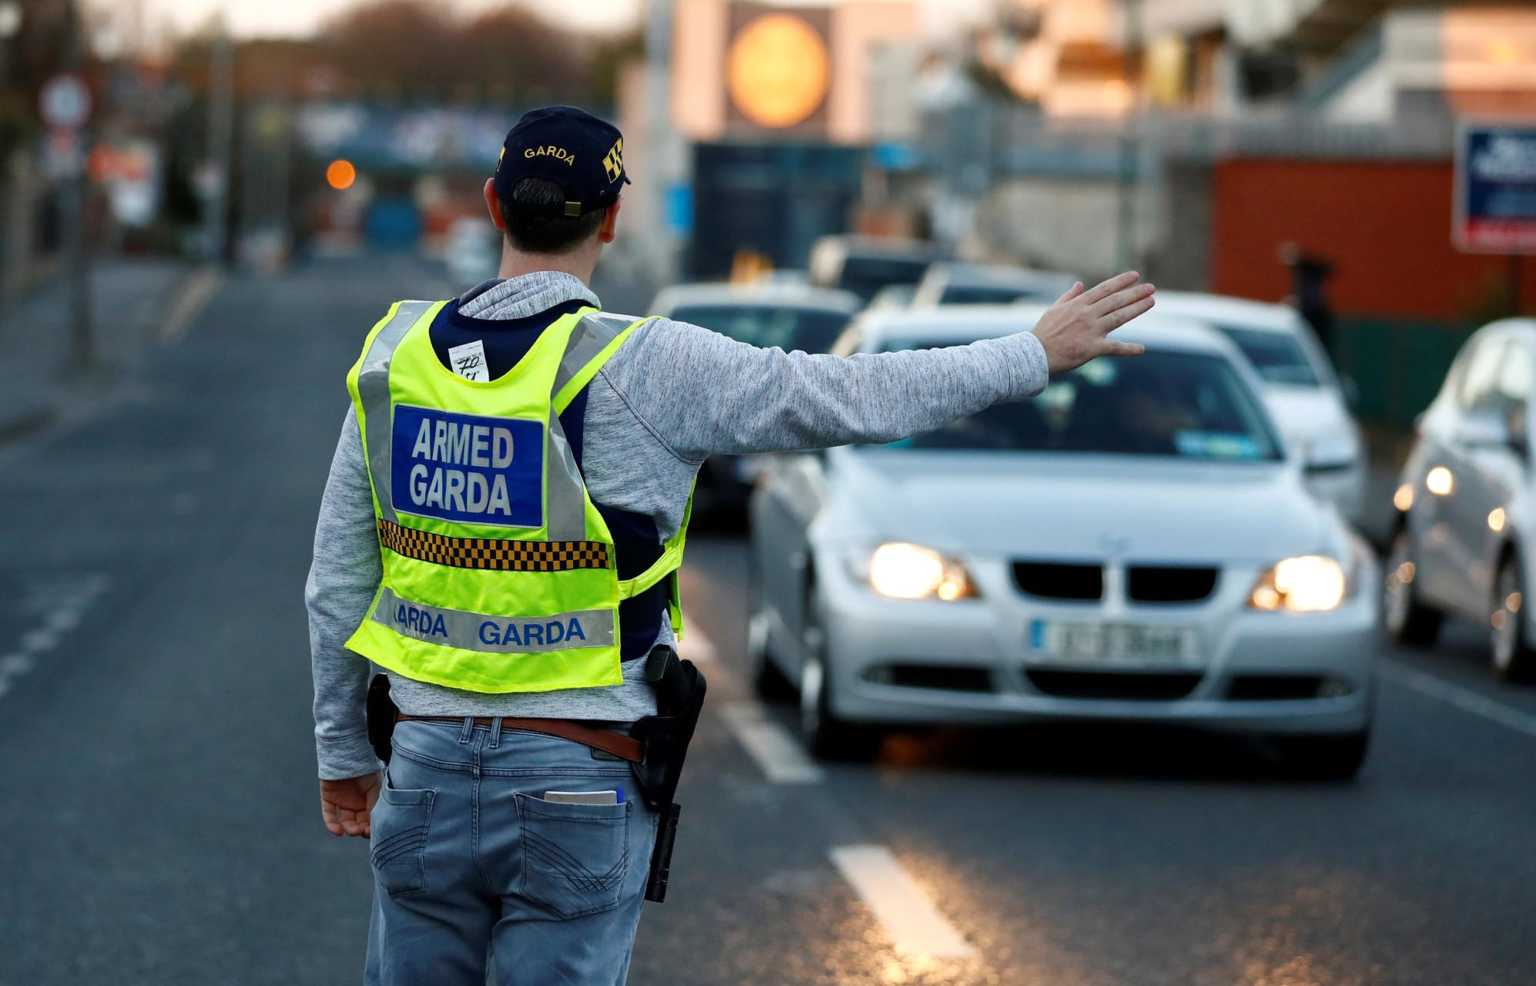 FILE PHOTO: A police officer is seen on the streets of Dublin as the spread of the coronavirus disease (COVID-19) continues, Dublin, Ireland, March 29, 2020. REUTERS/Jason Cairnduff/File Photo